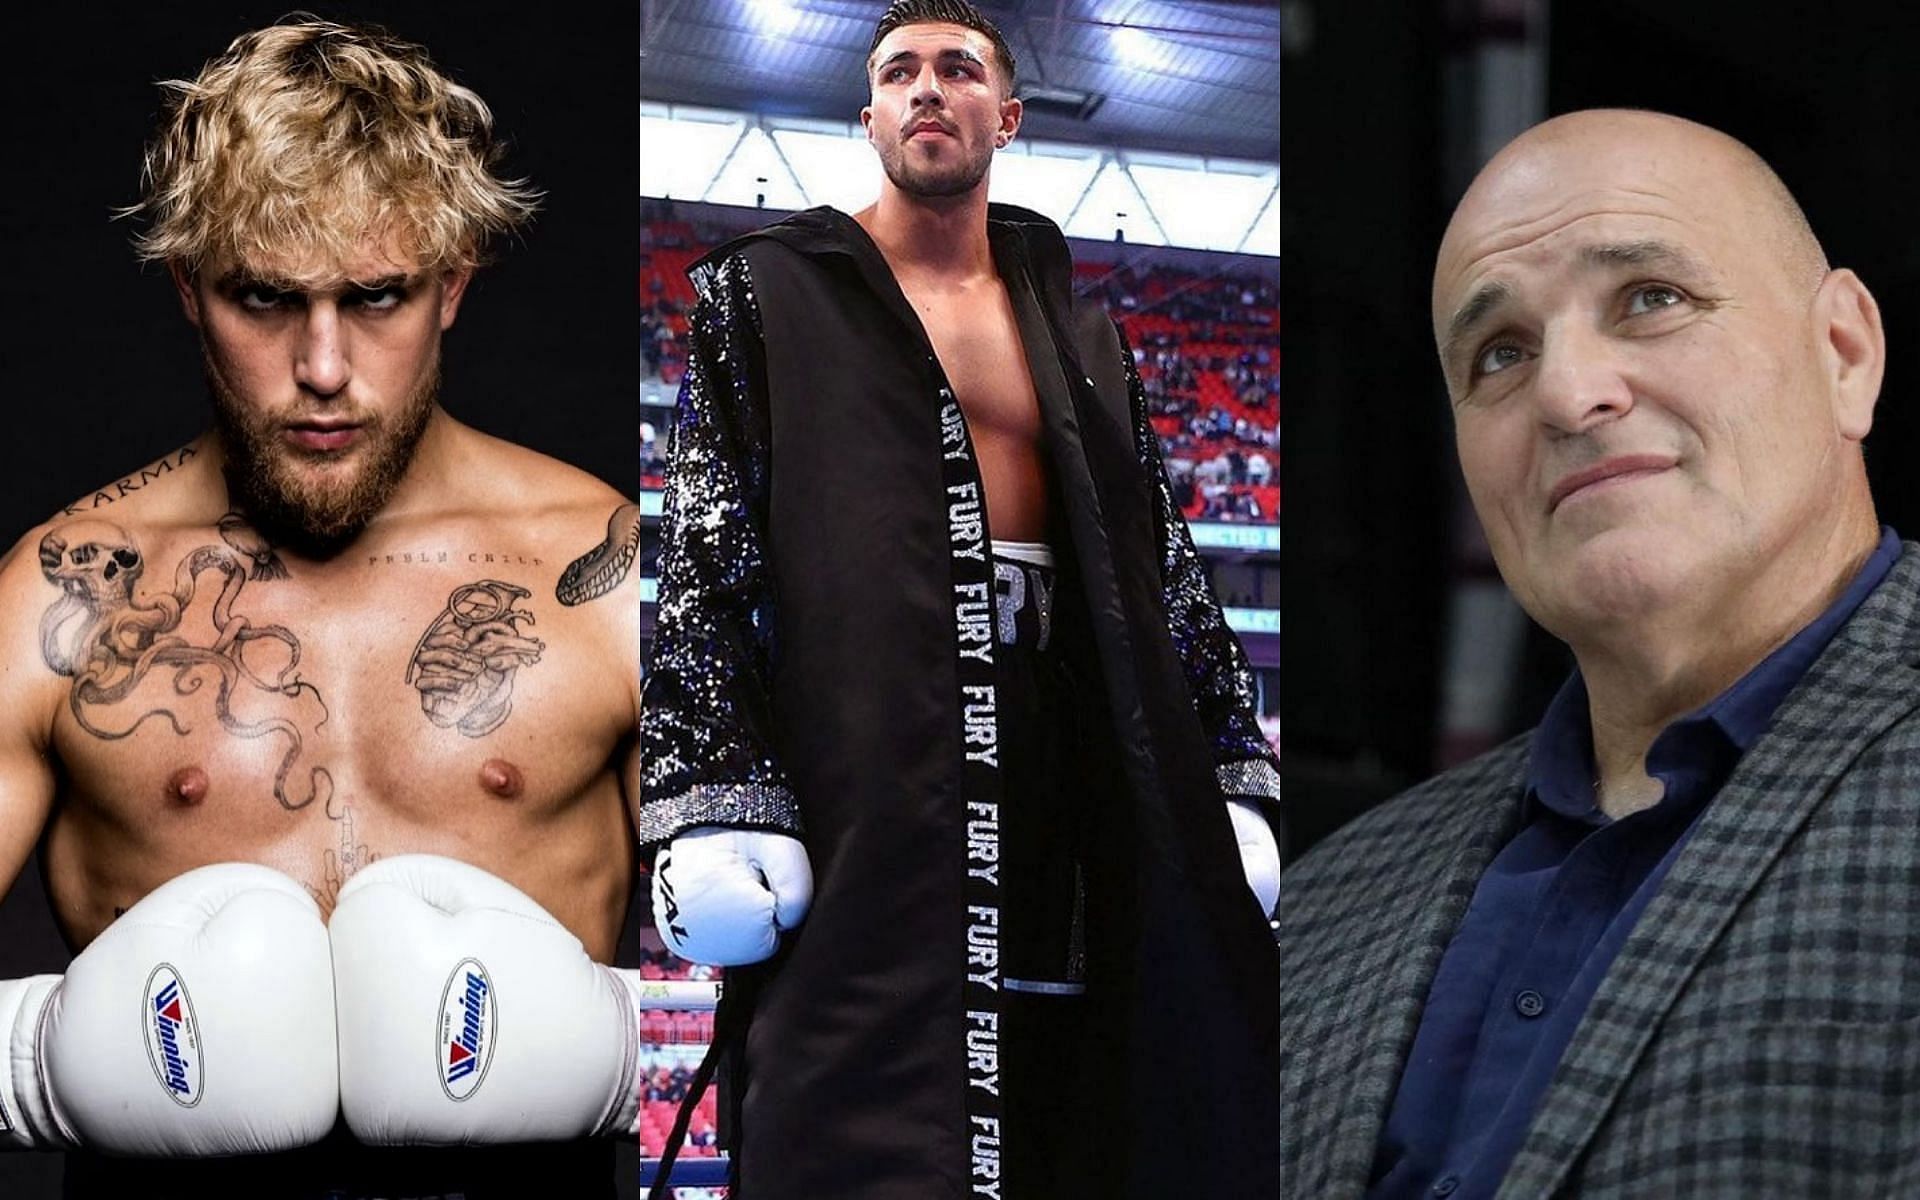 [From left to right] Jake Paul, Tommy Fury and John Fury